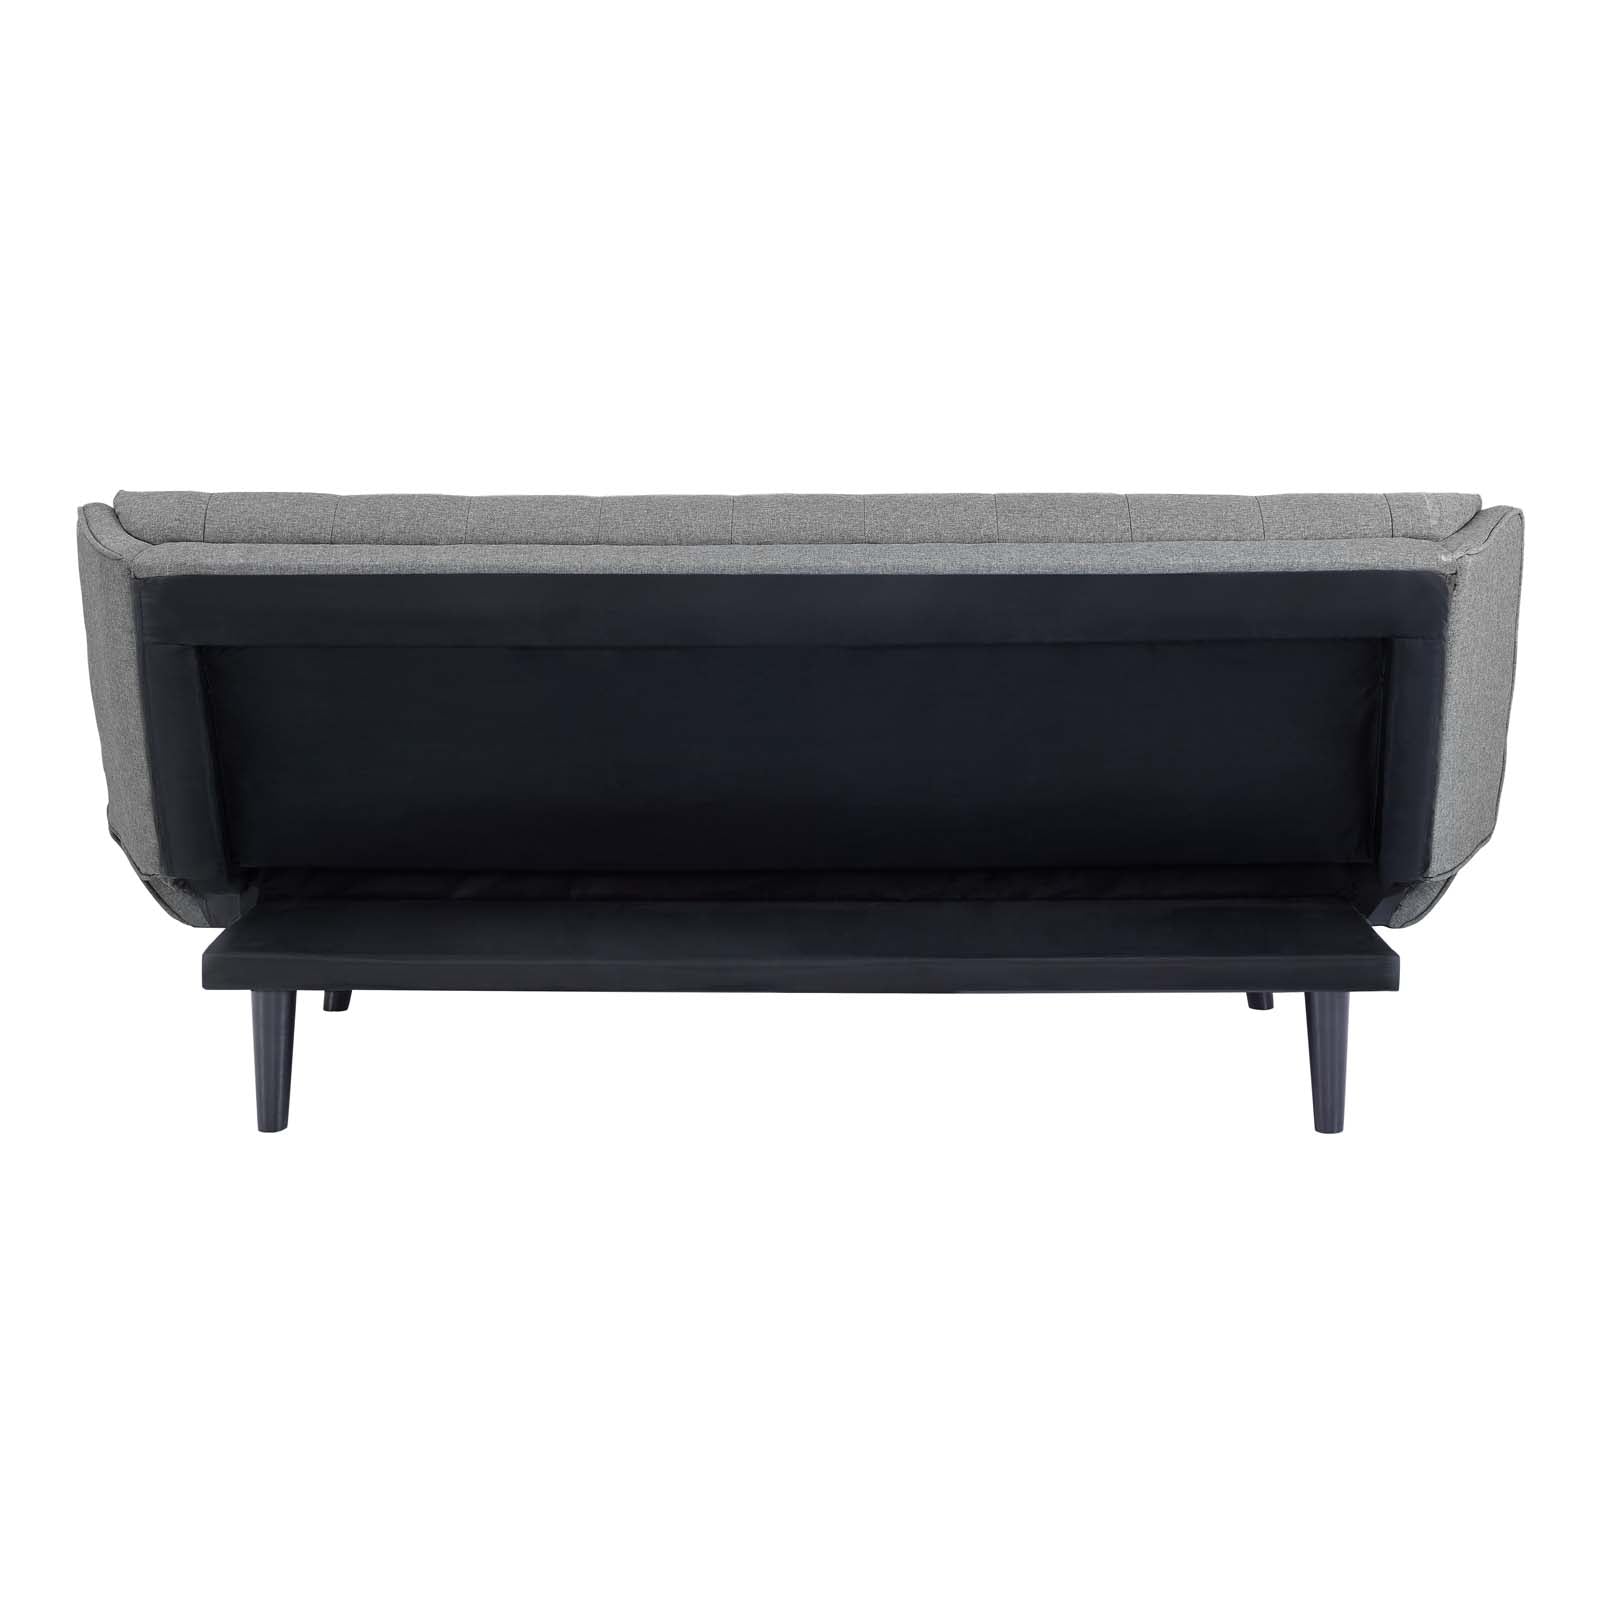 Modway Sofas & Couches - Glance Tufted Convertible Fabric Sofa Bed Gray